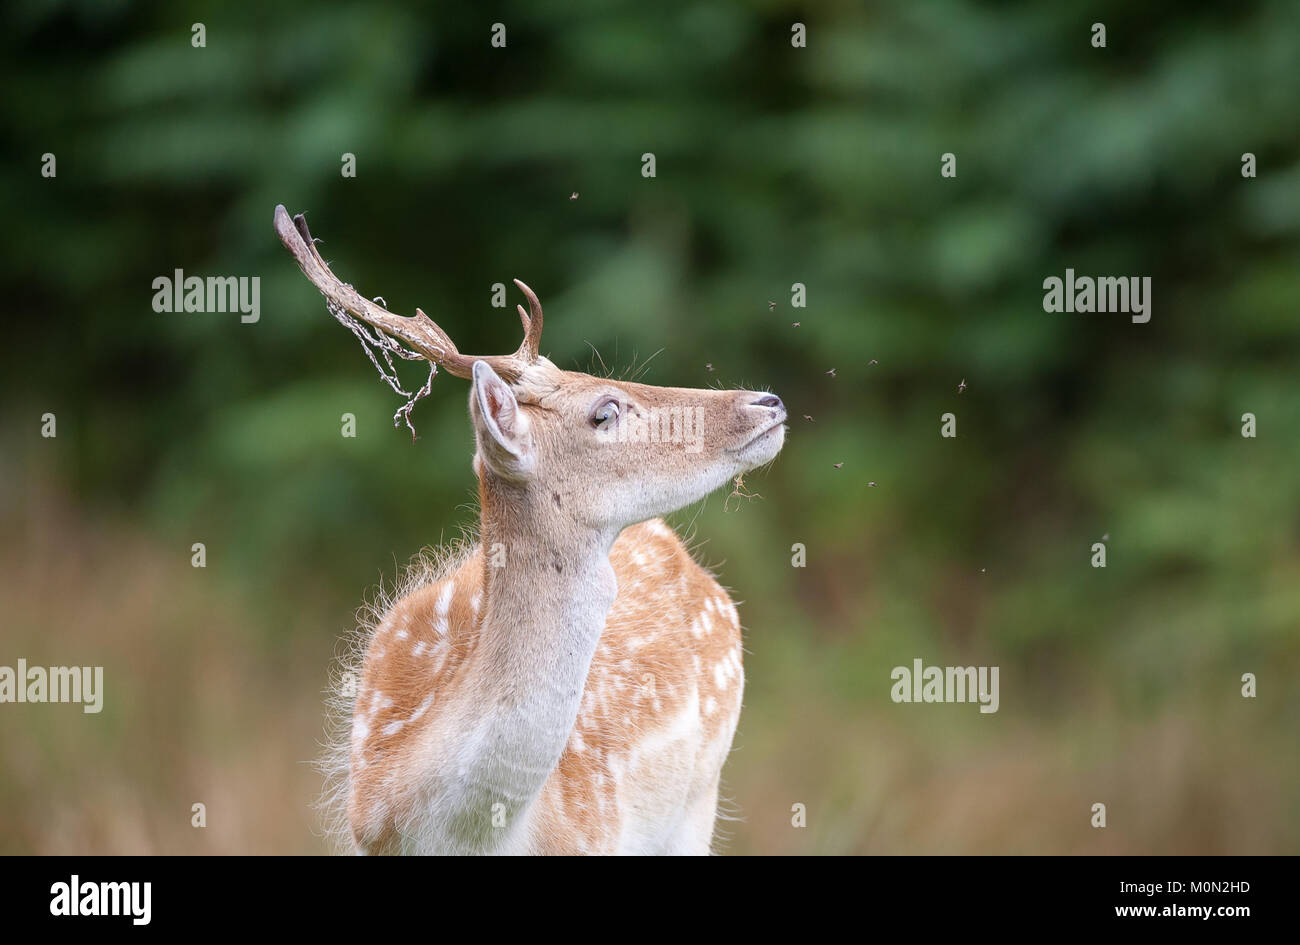 Detailed close-up front view of young, wild UK fallow deer buck ...